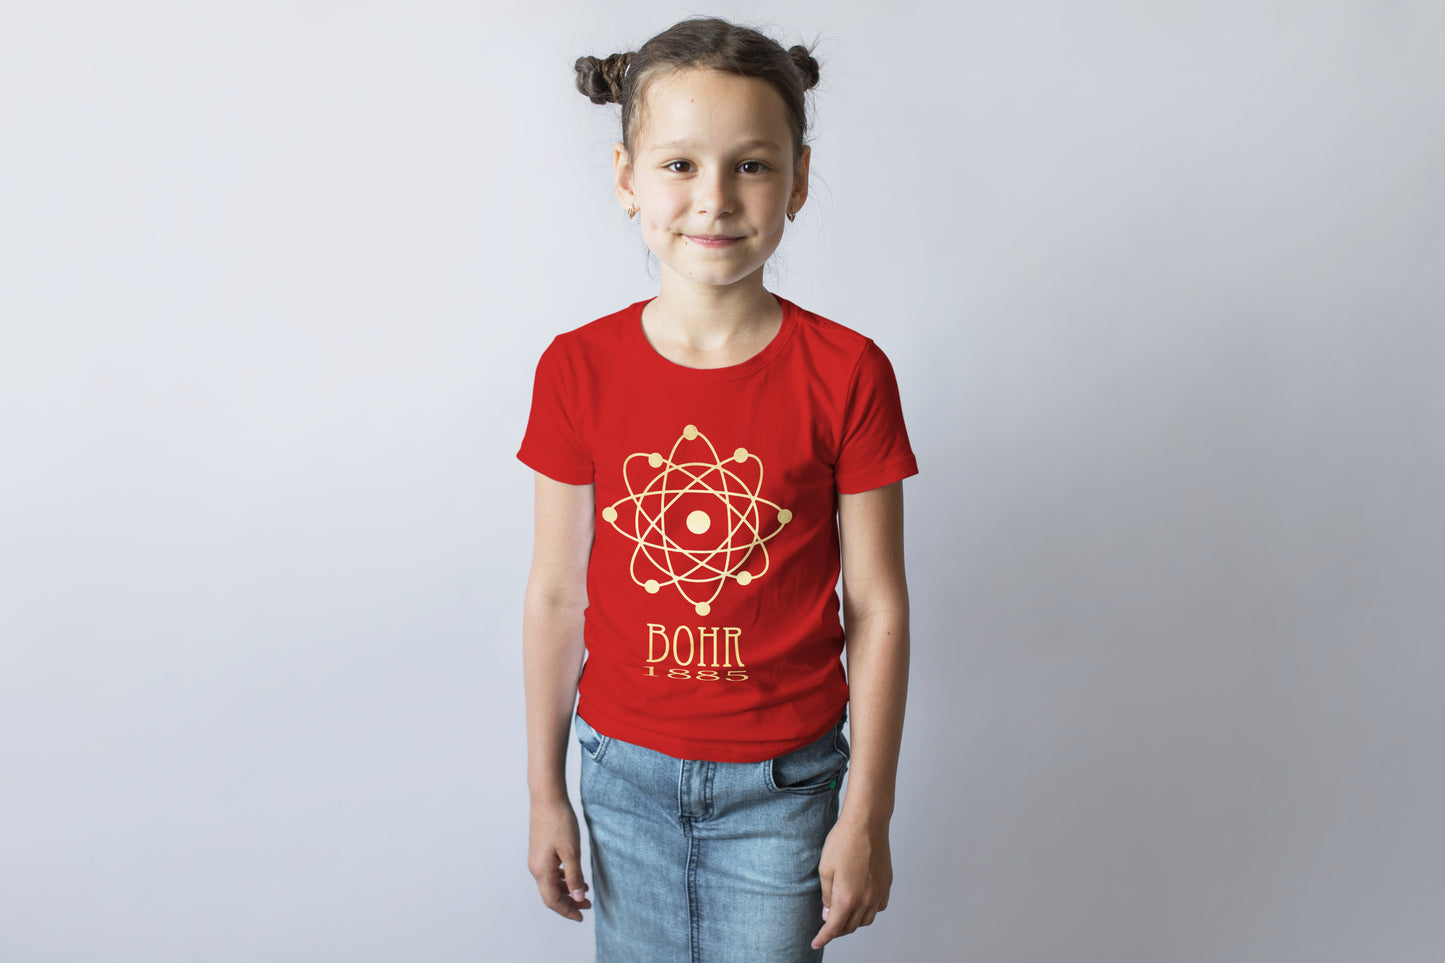 Bohr Atomic Structure Physics T-shirt, Niels Bohr Science Gift and Graphic Tee